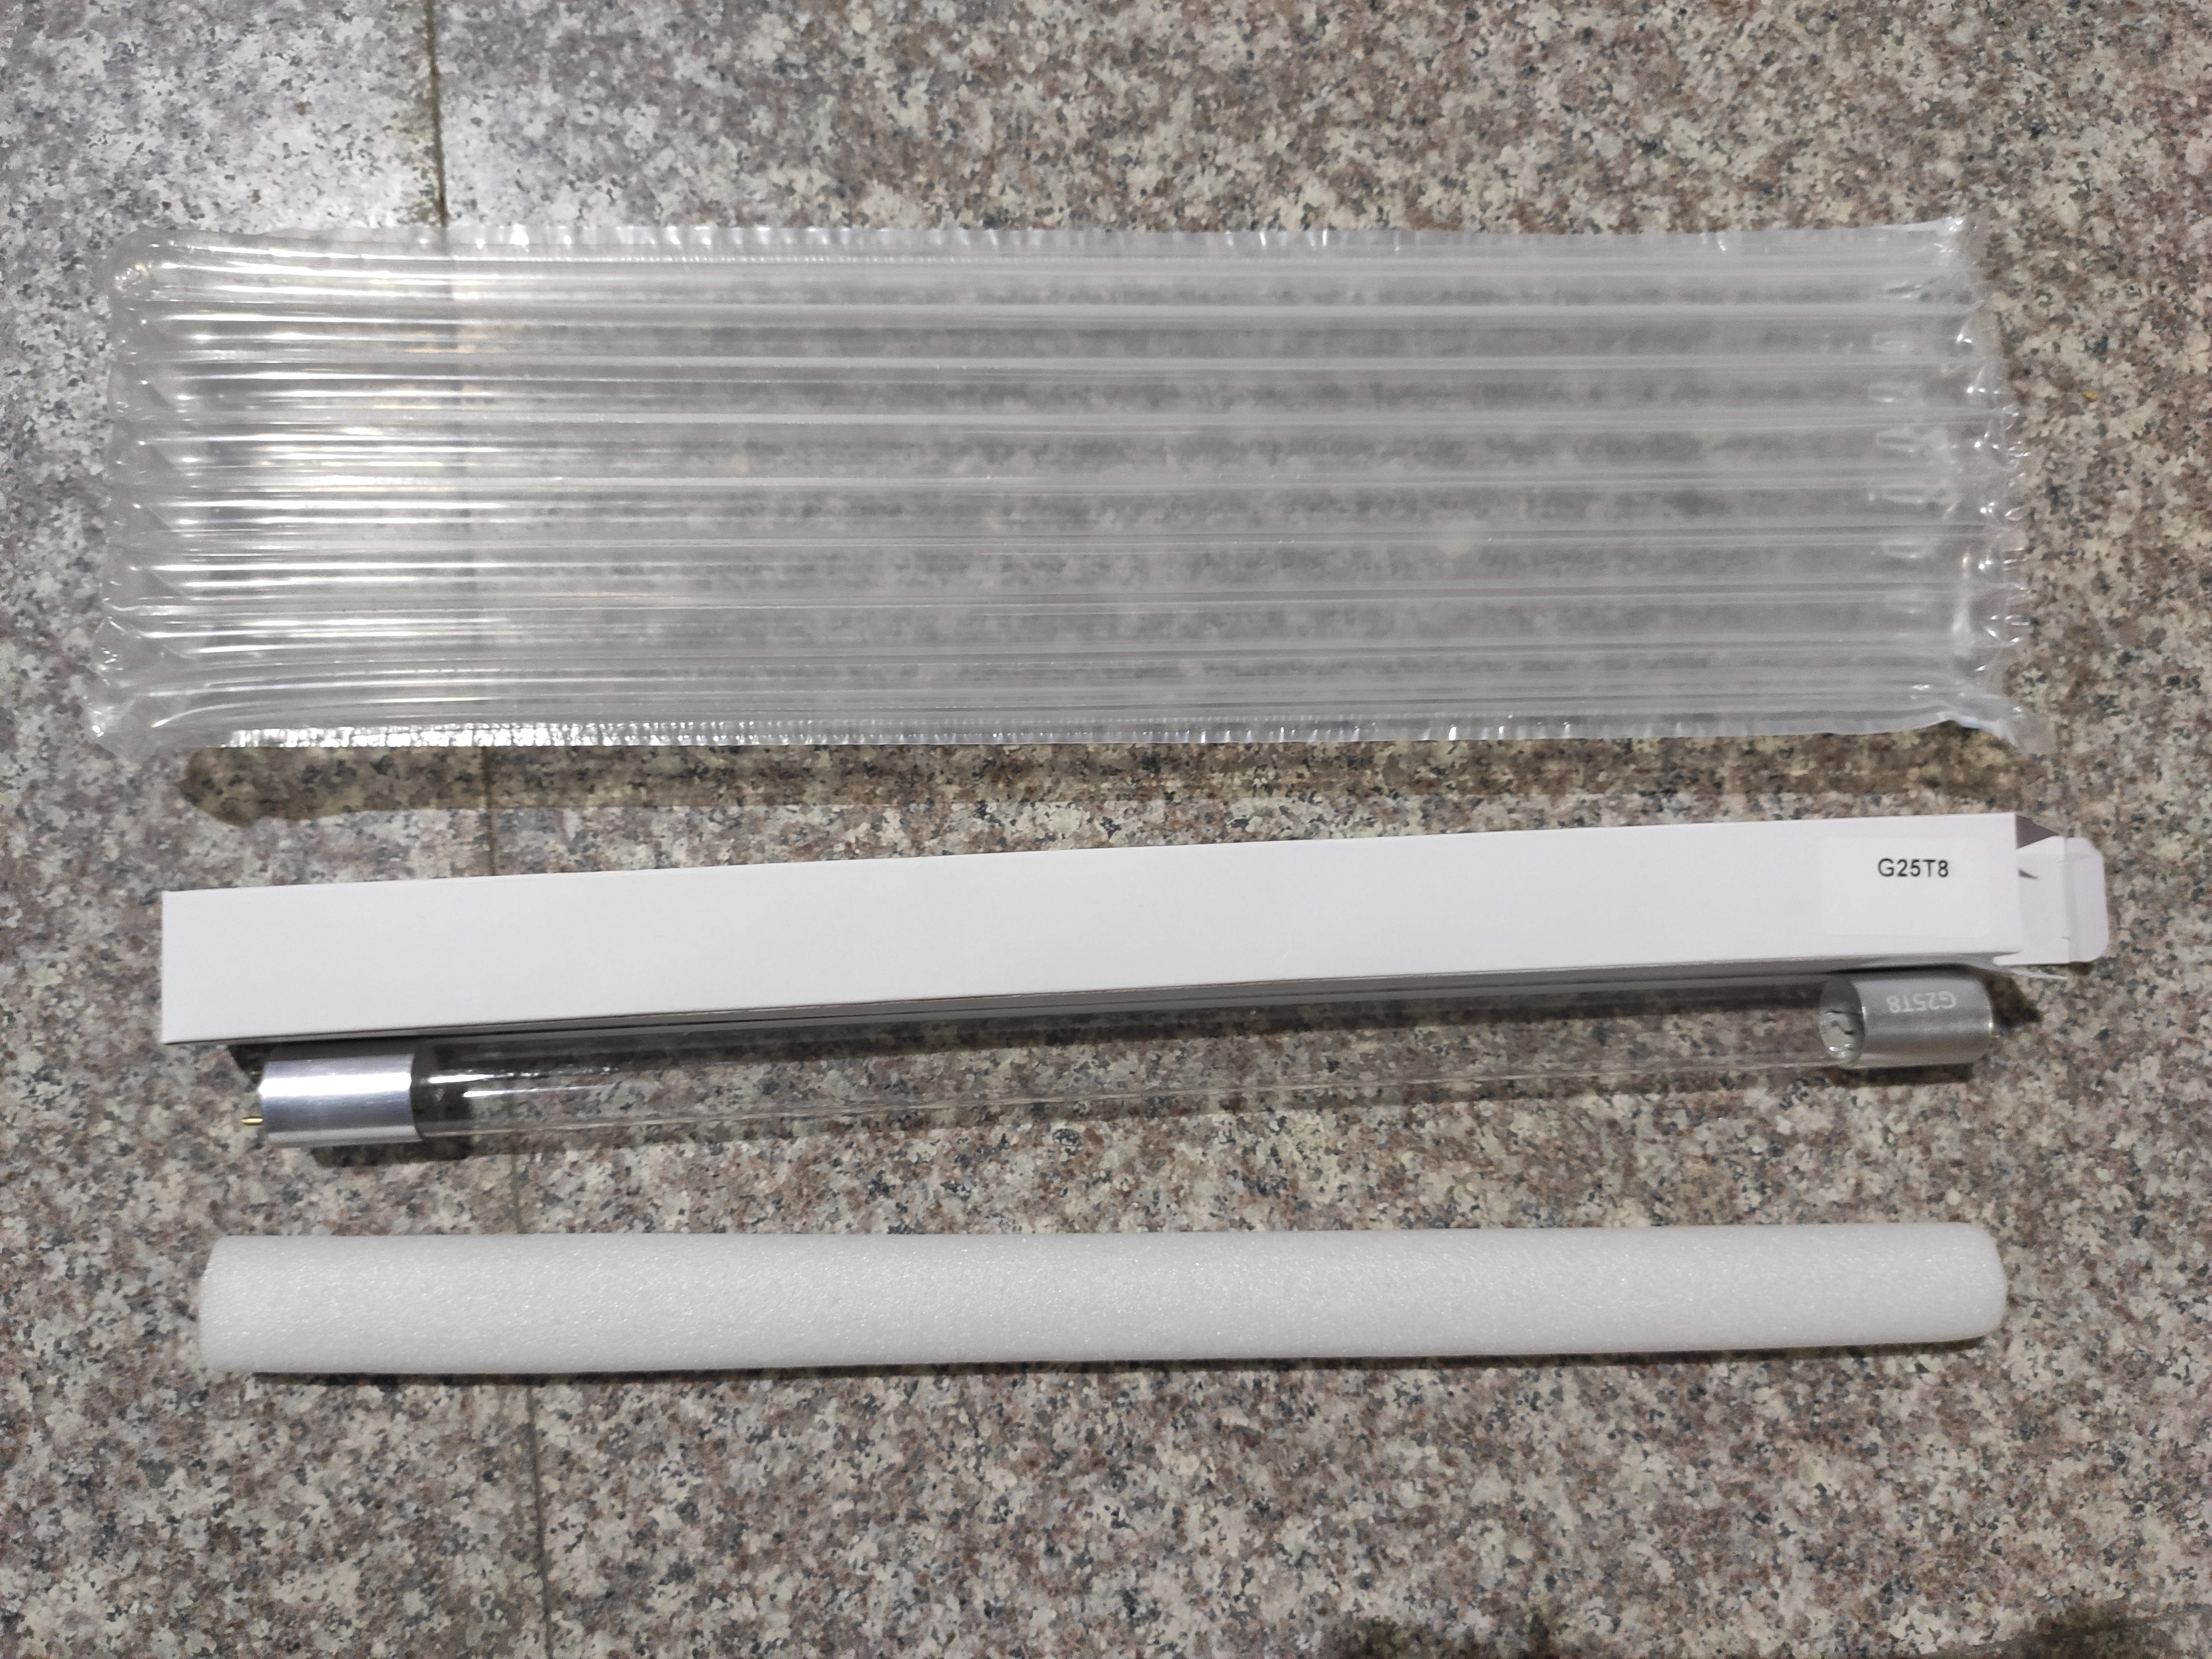 UVC lamp G8T5,G15T8,G20T8,G25T8,G30T8,G40T8 Double-end two-pin aluminum G13 base T5 TUV T8 germicidal lamp for air purification surface disinfection